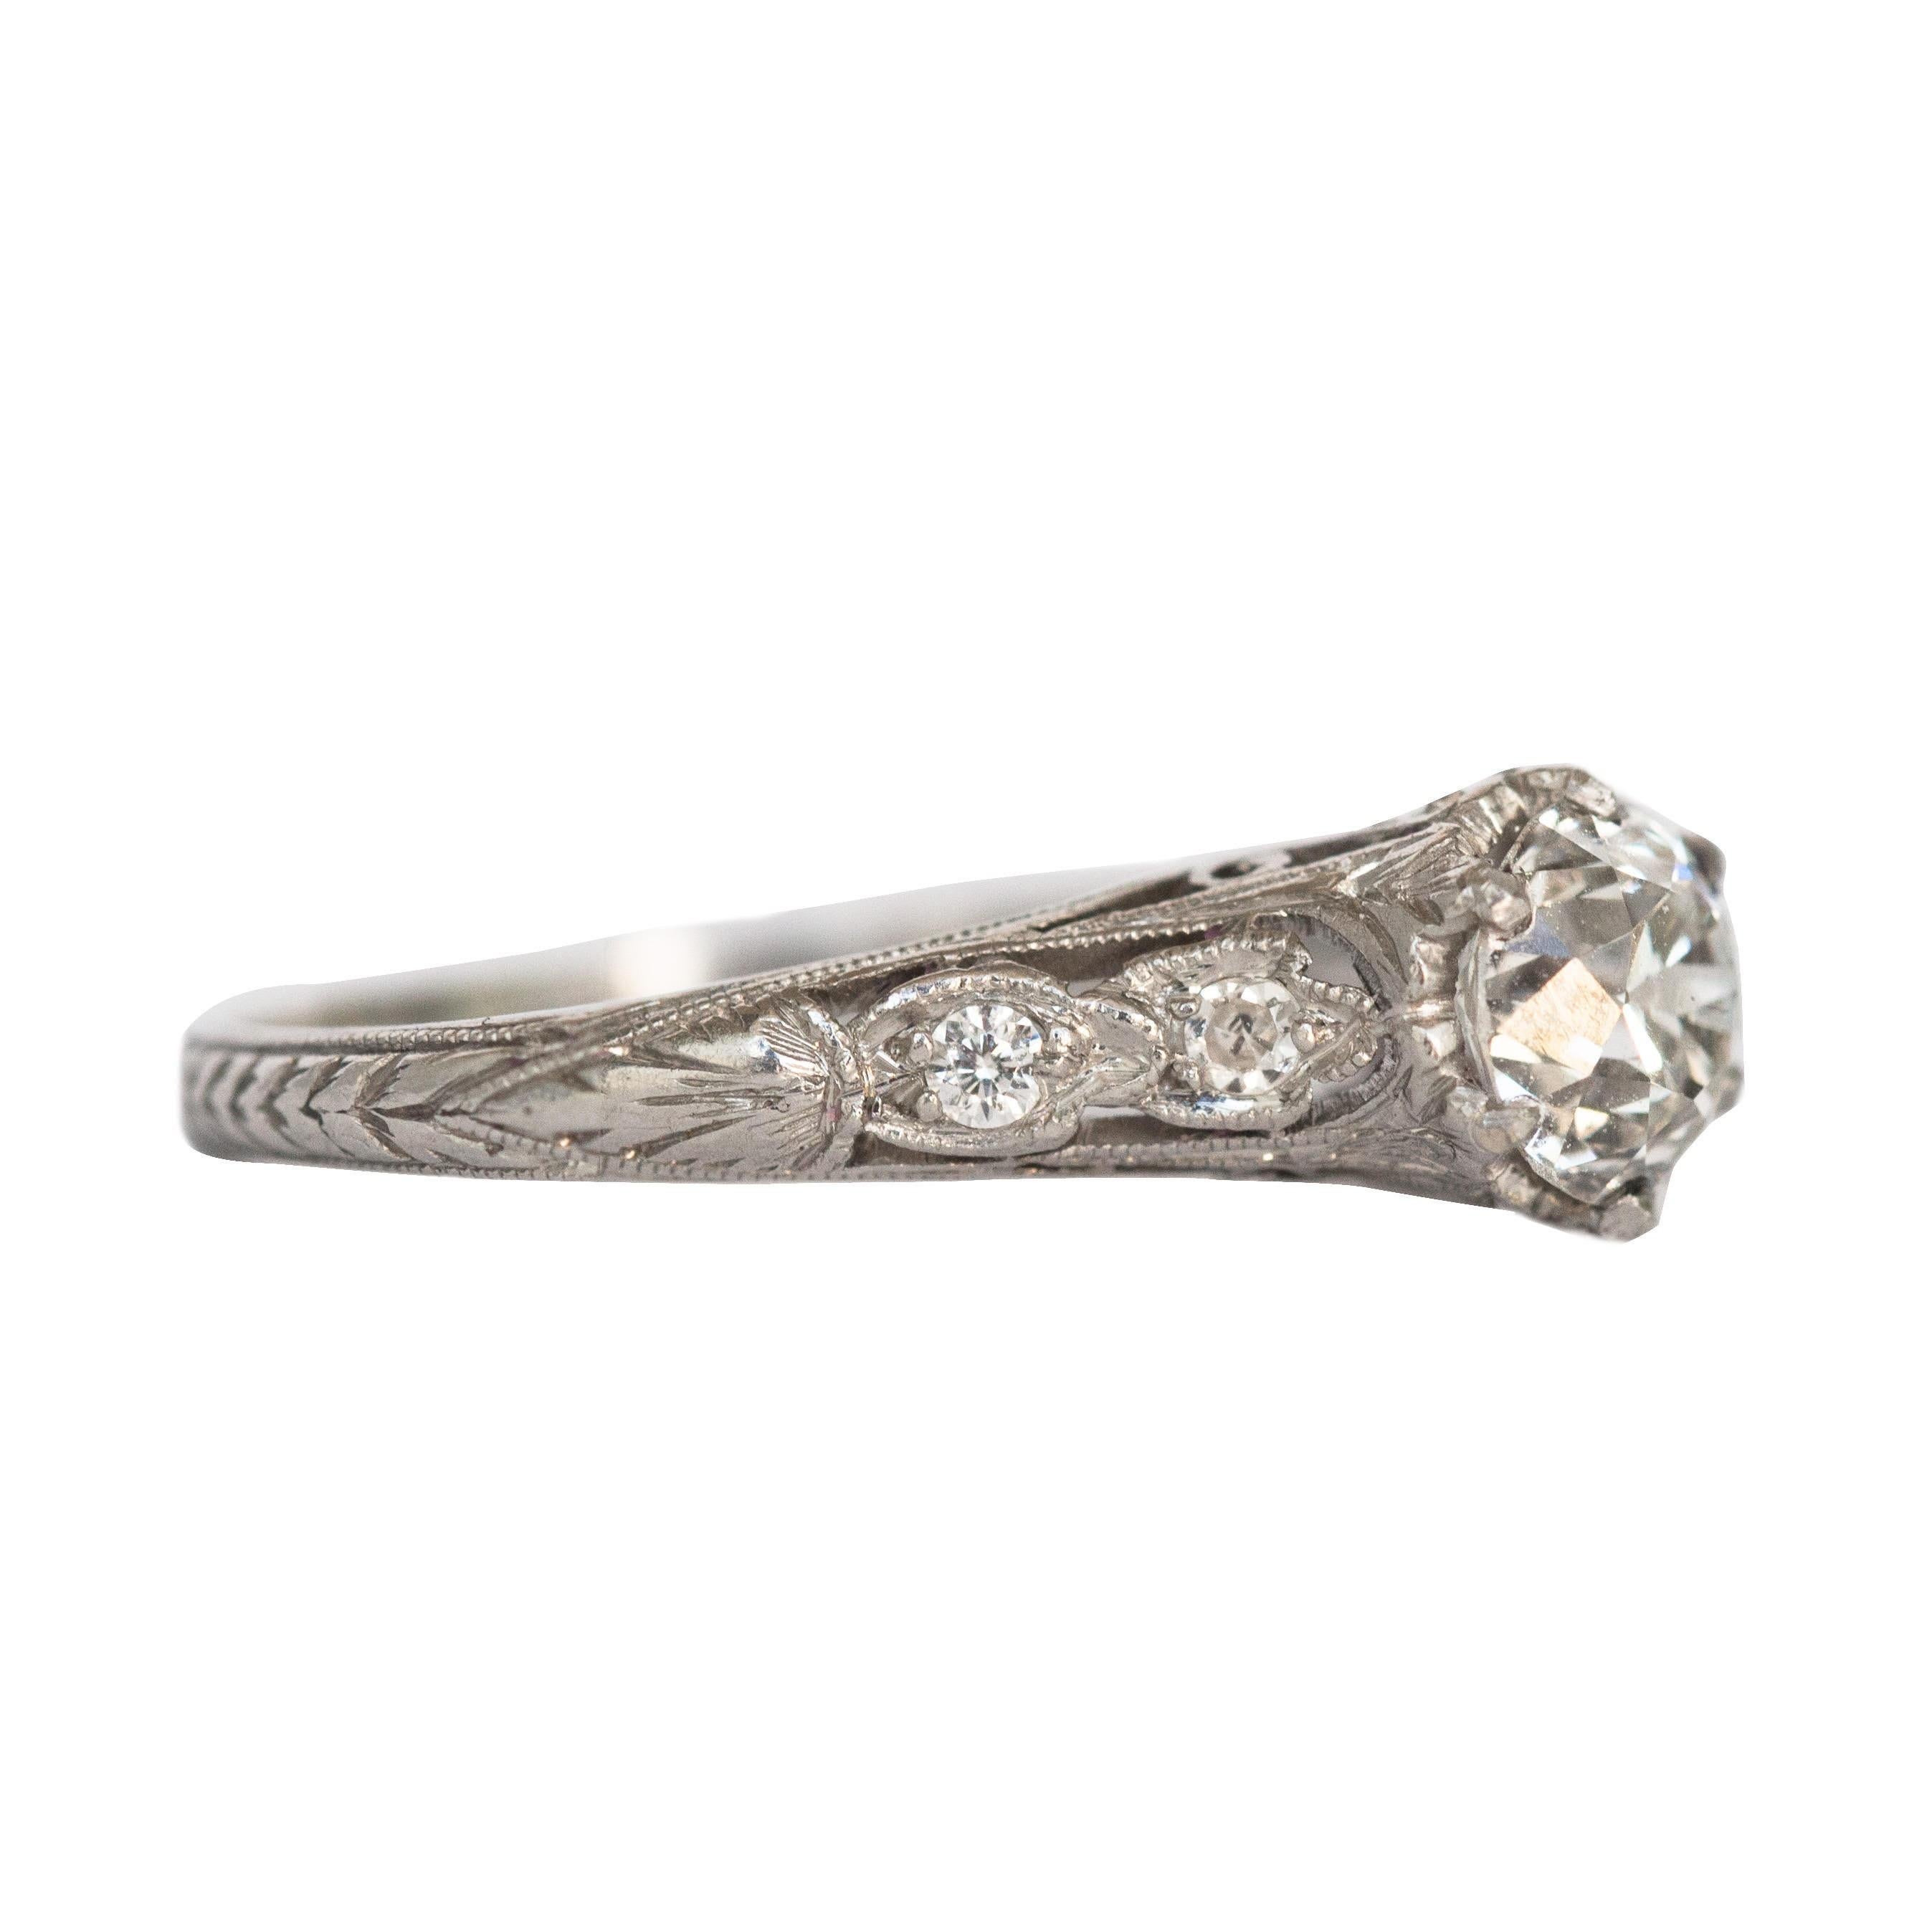 Circa 1910's Edwardian Platinum .93 ct Old European Cut Diamond Engagement Ring In Good Condition For Sale In Addison, TX